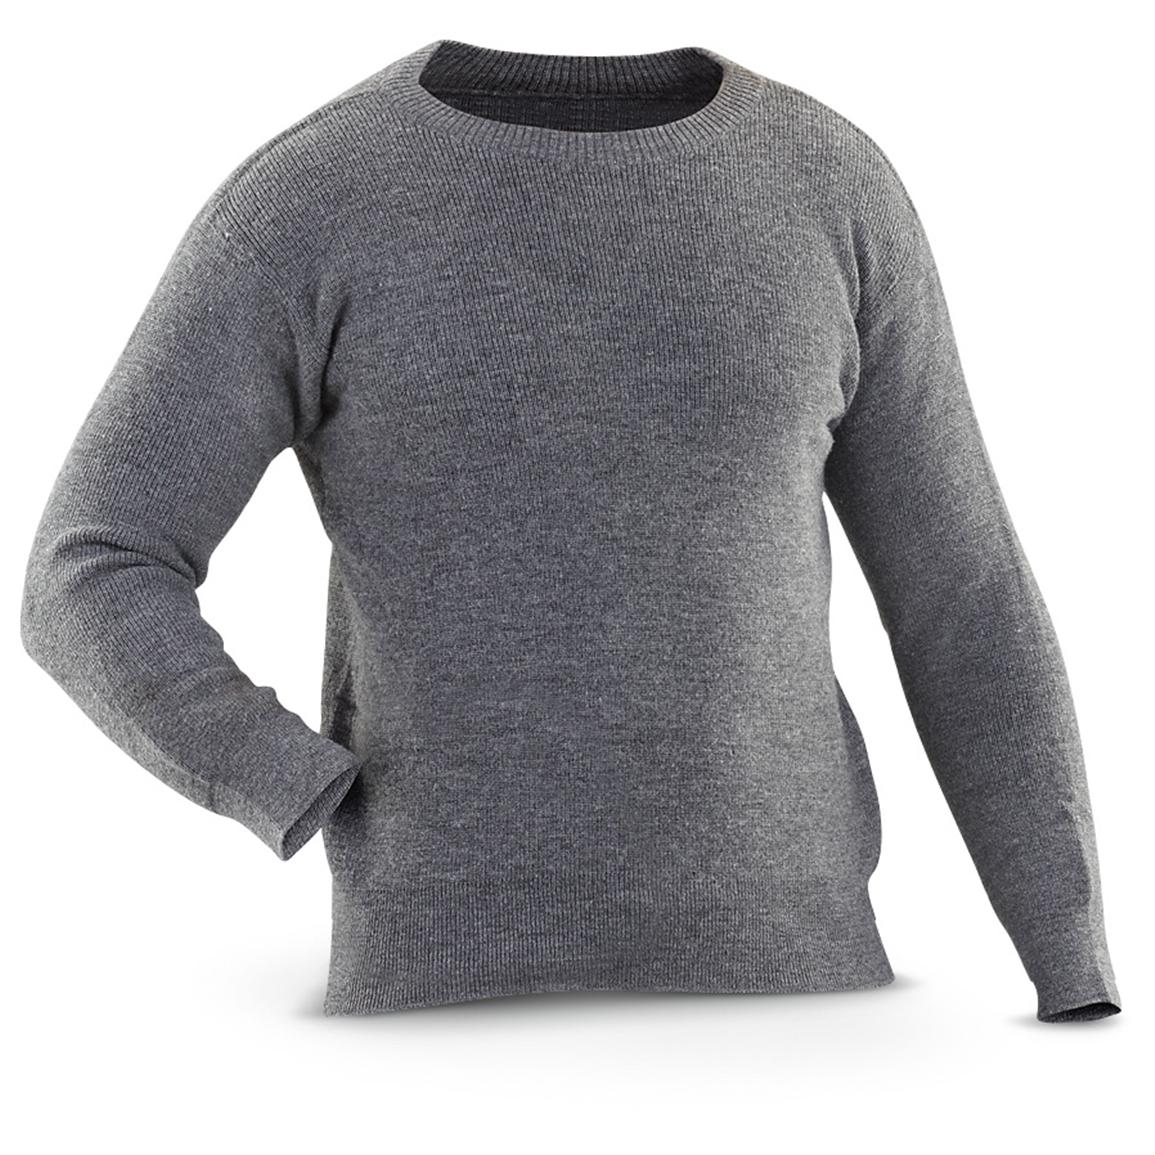 2 Used Swiss Military Wool Sweaters, Gray - 176706, Sweaters at ...